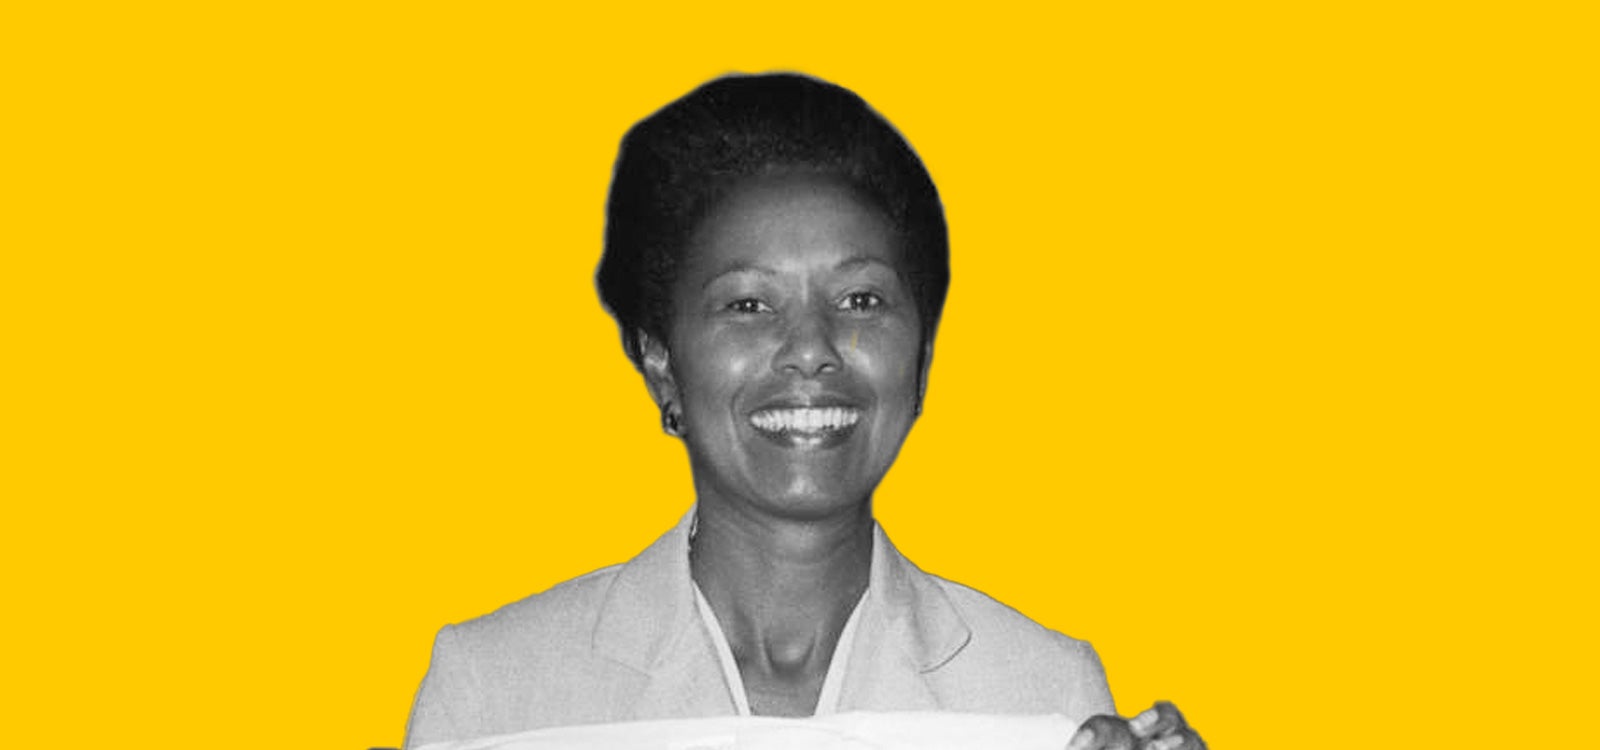 Cut-out black and white profile photo of former US Representative and USC trustee Yvonne Brathwaite Burke with yellow background